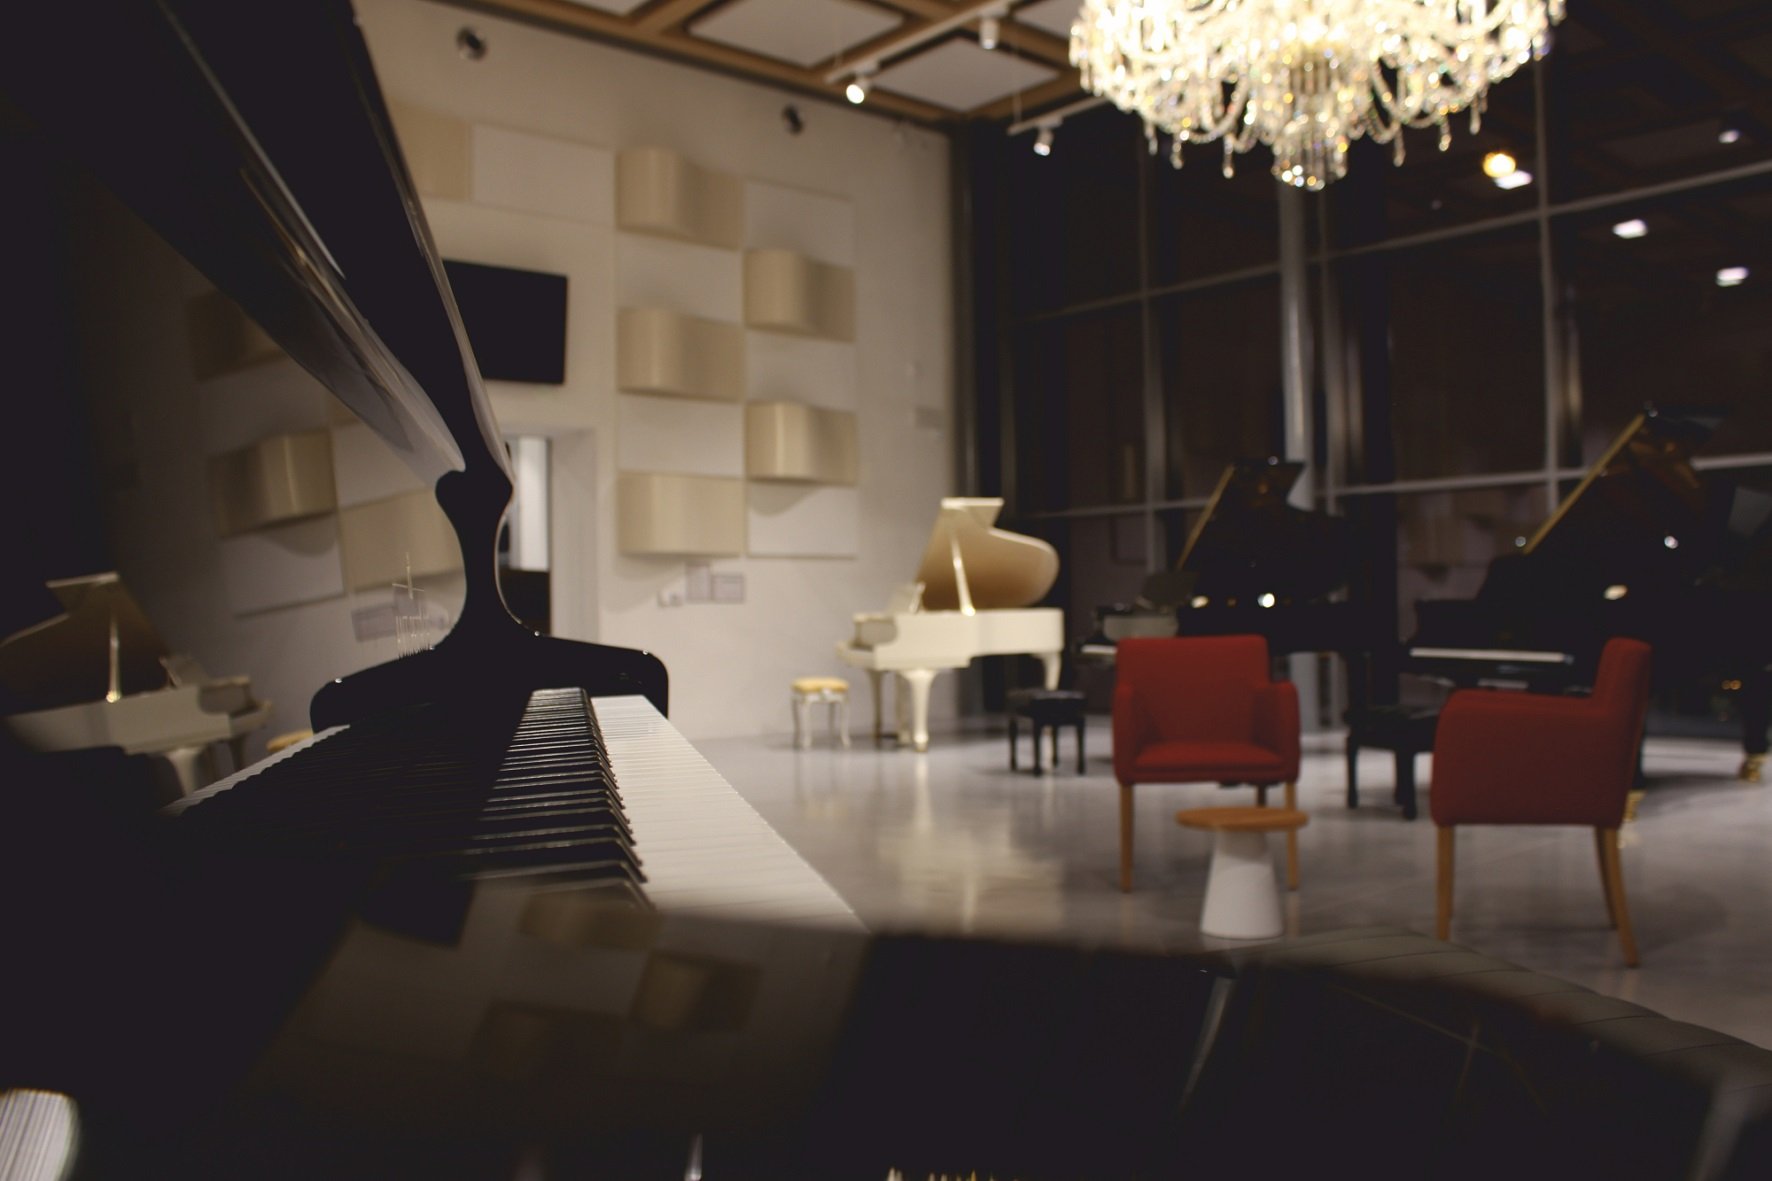 What is the size of the grand piano and the upright piano?